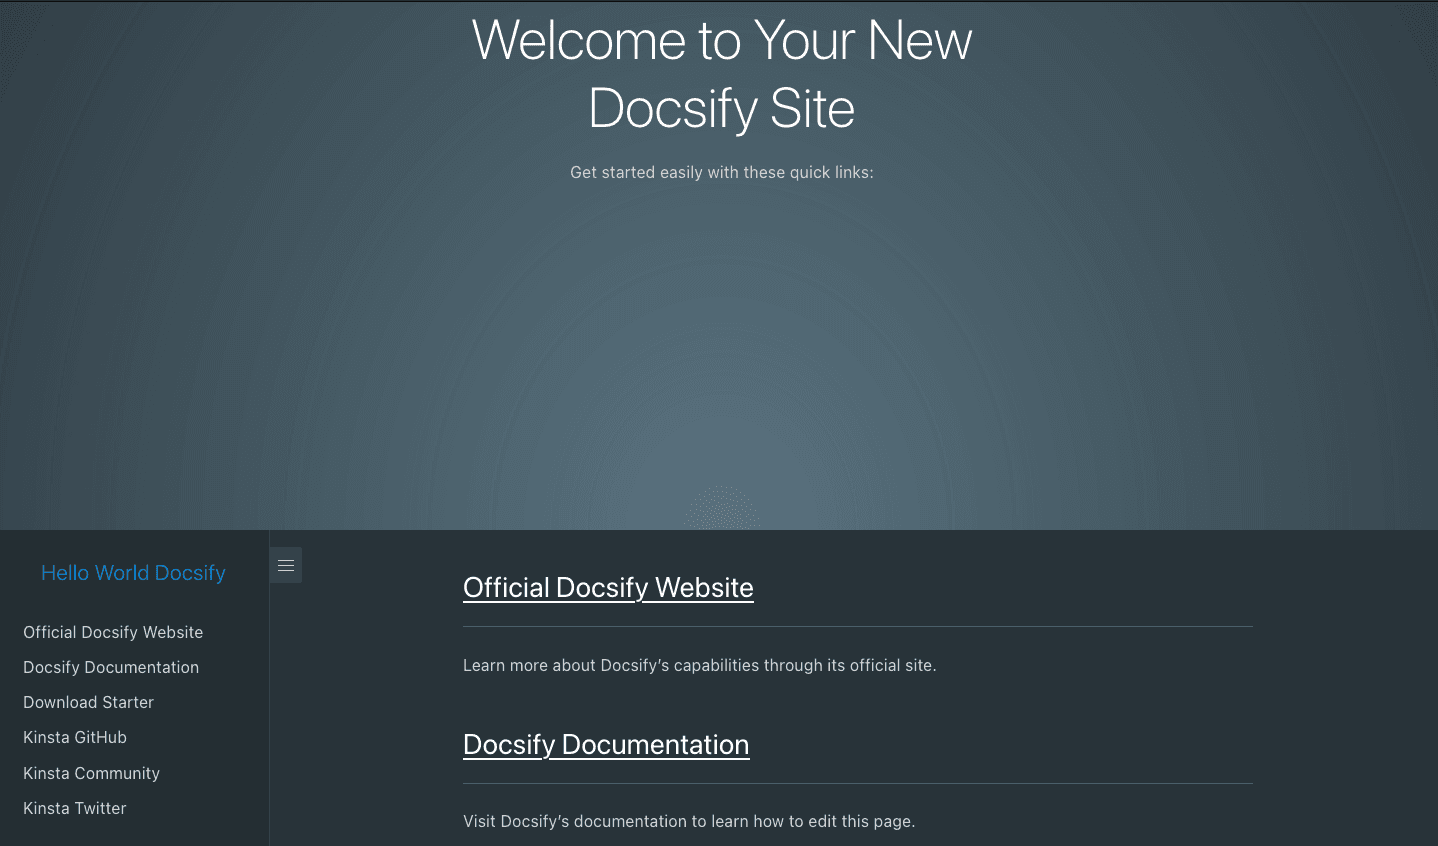 Docsify Welcome page after successful deployment of Docsify.